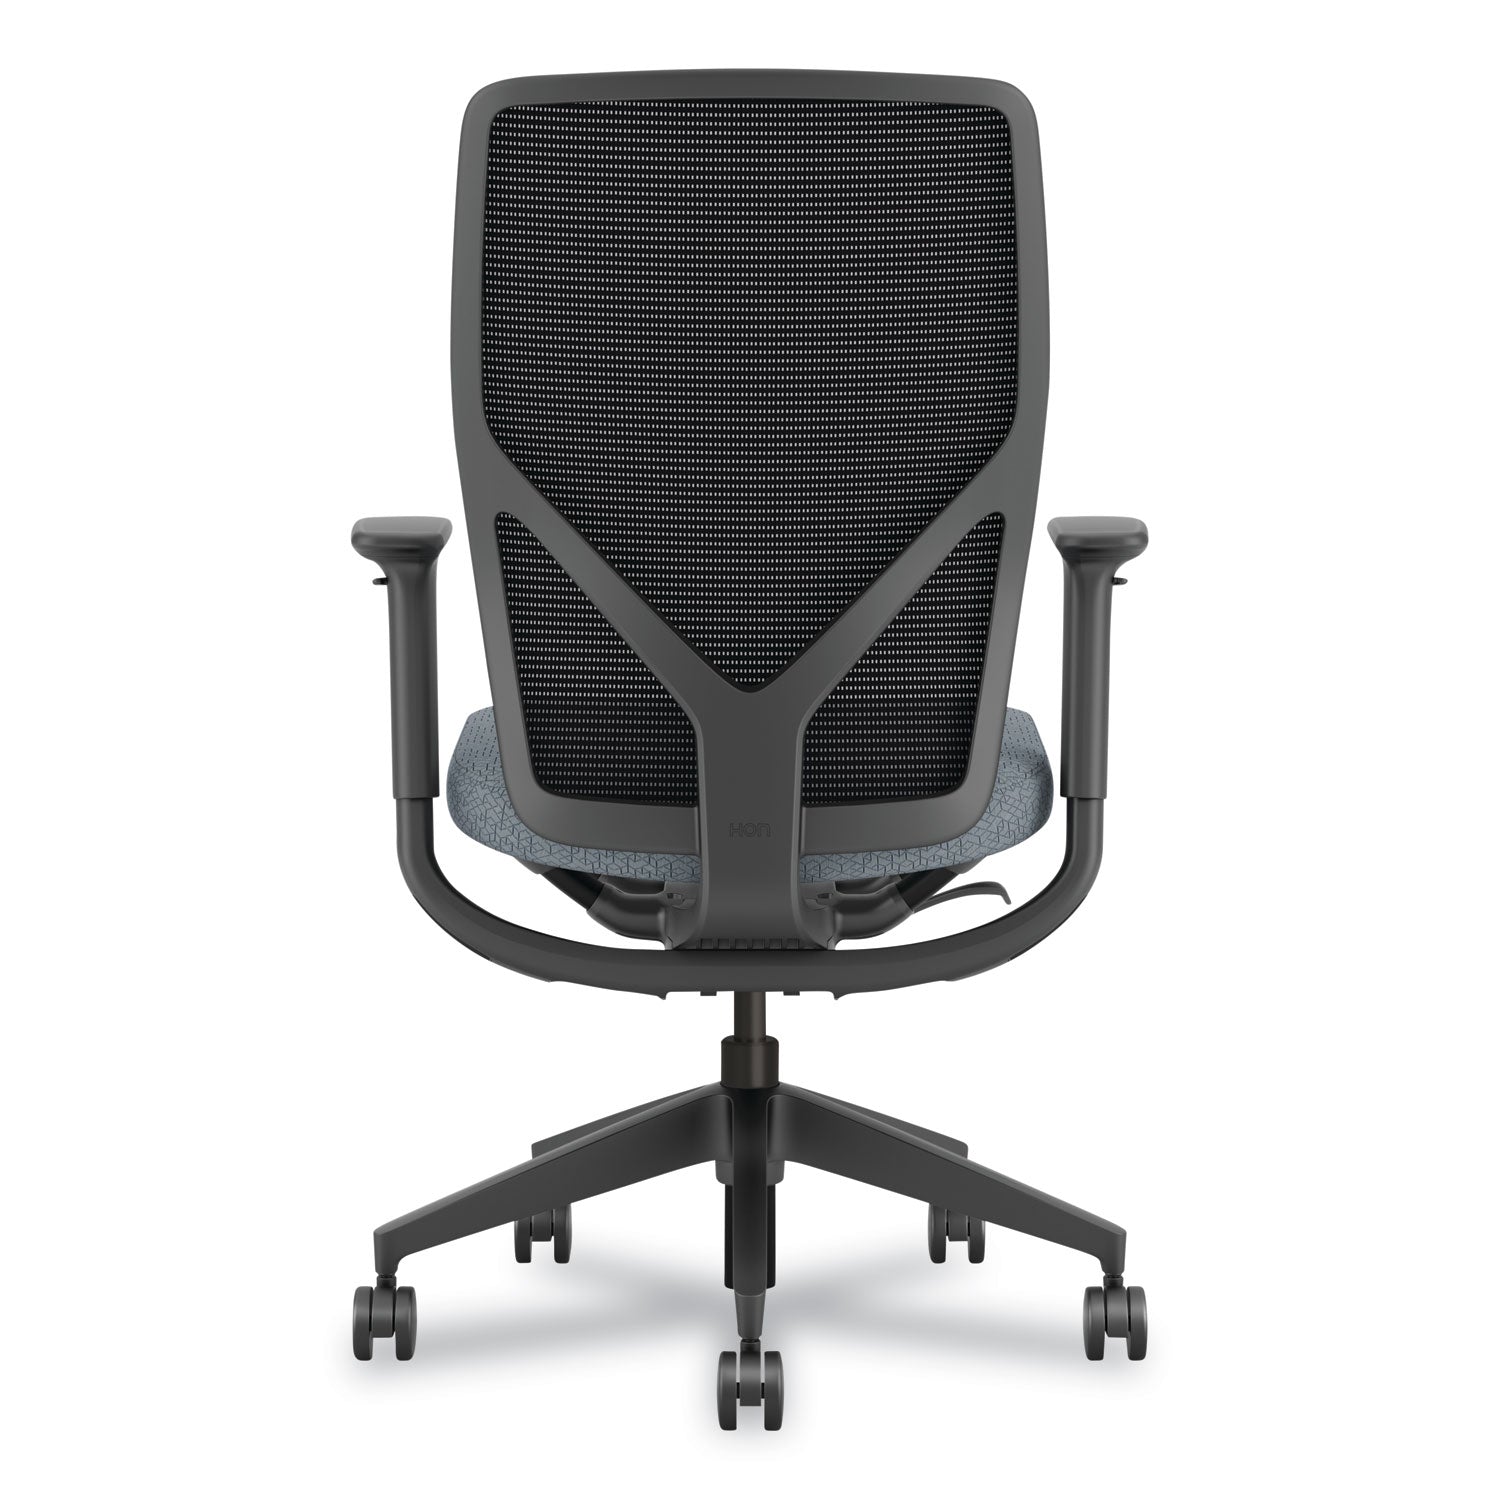 Flexion Mesh Back Task Chair, Supports Up to 300 lb, 14.81" to 19.7" Seat Height, Black/Basalt - 2